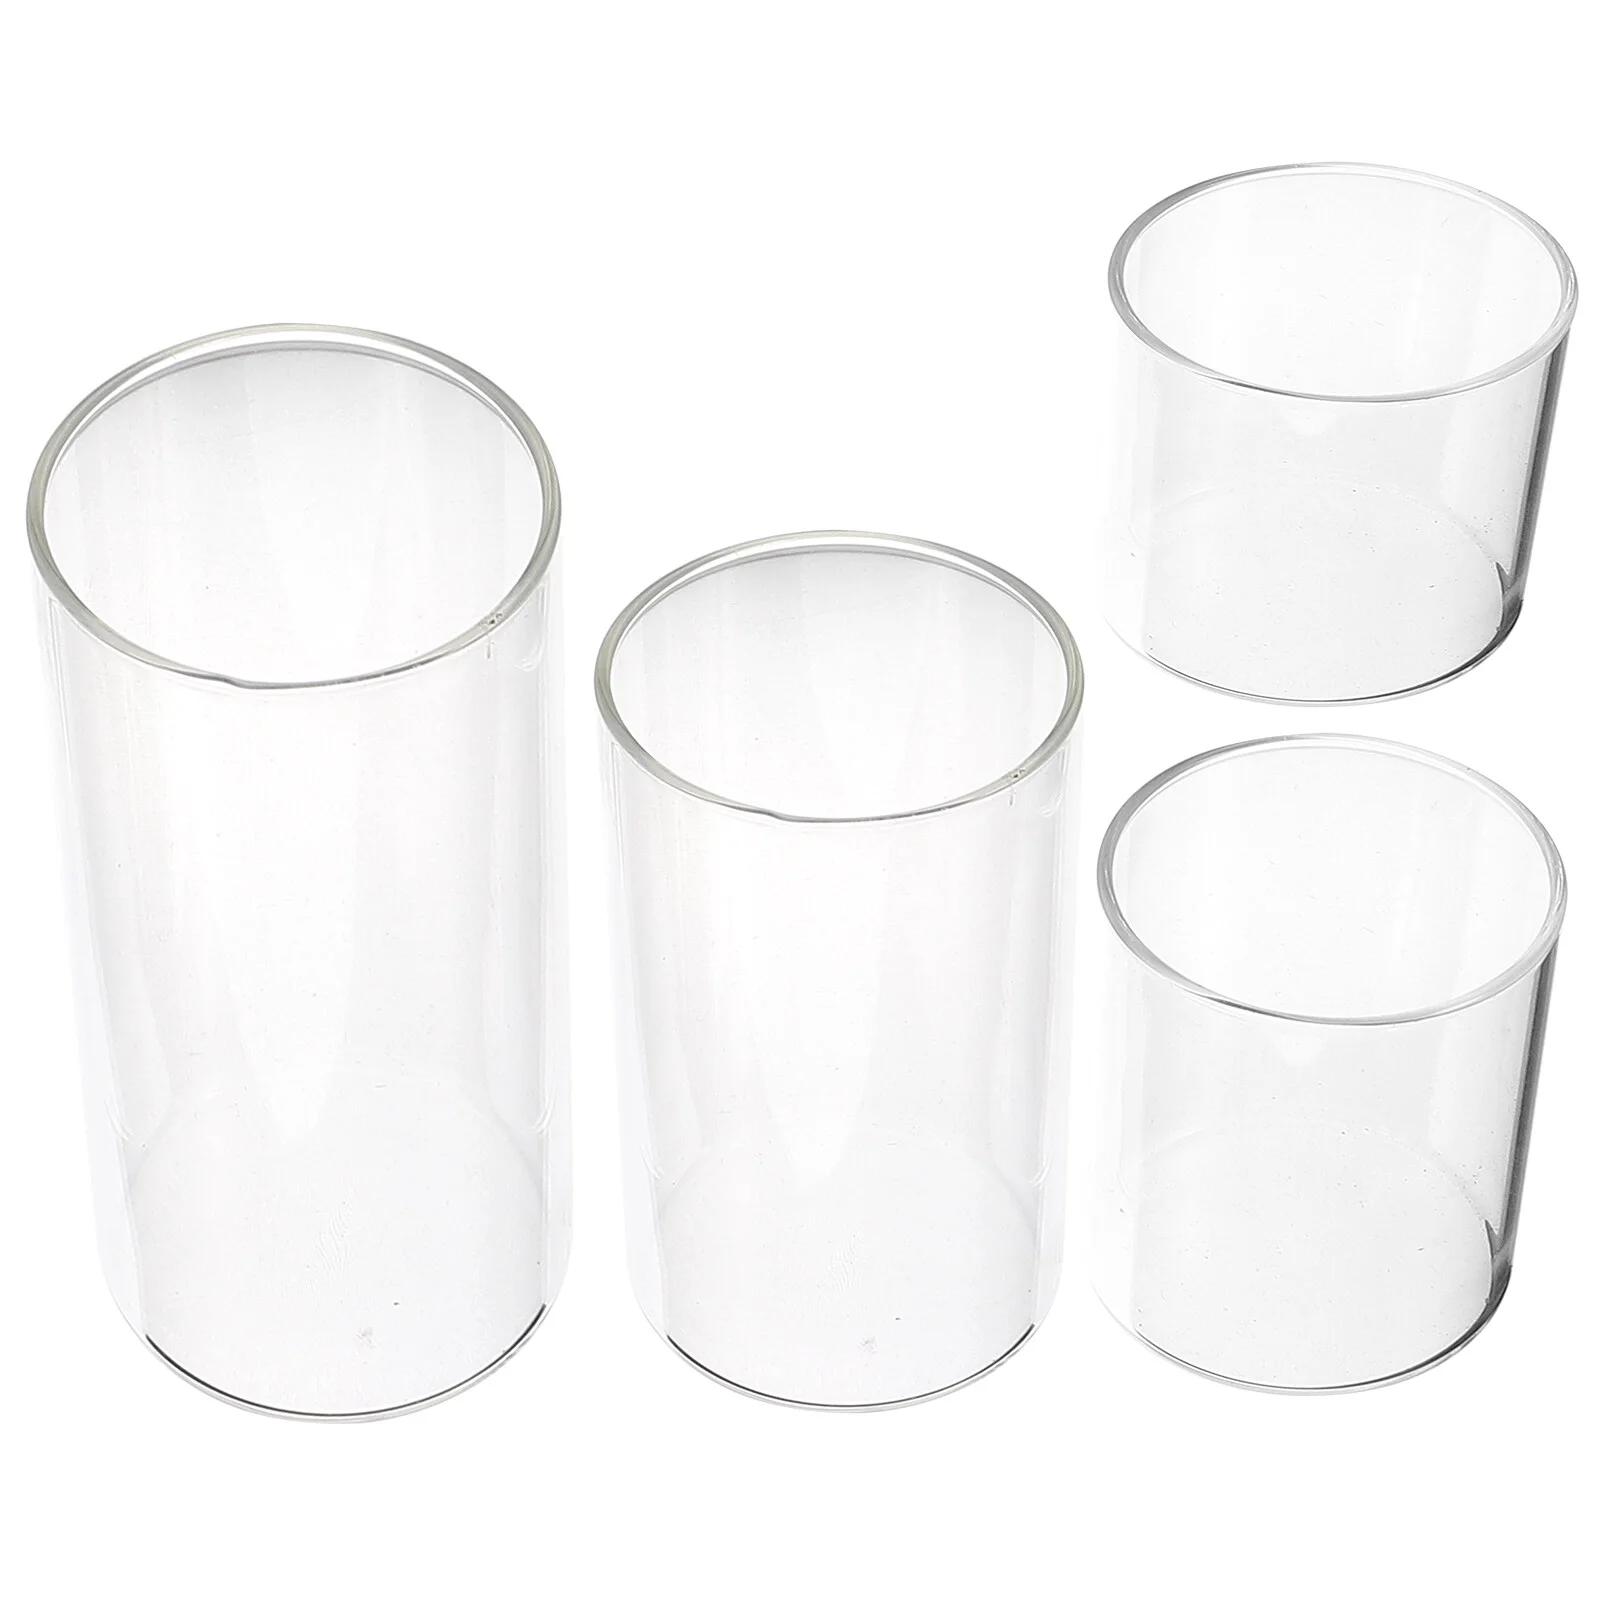 

4 Pcs Clear Jars Clear Holder Glass Cup Holder Clear Desktop Holders Table Centerpiece Tall Pillar Candles